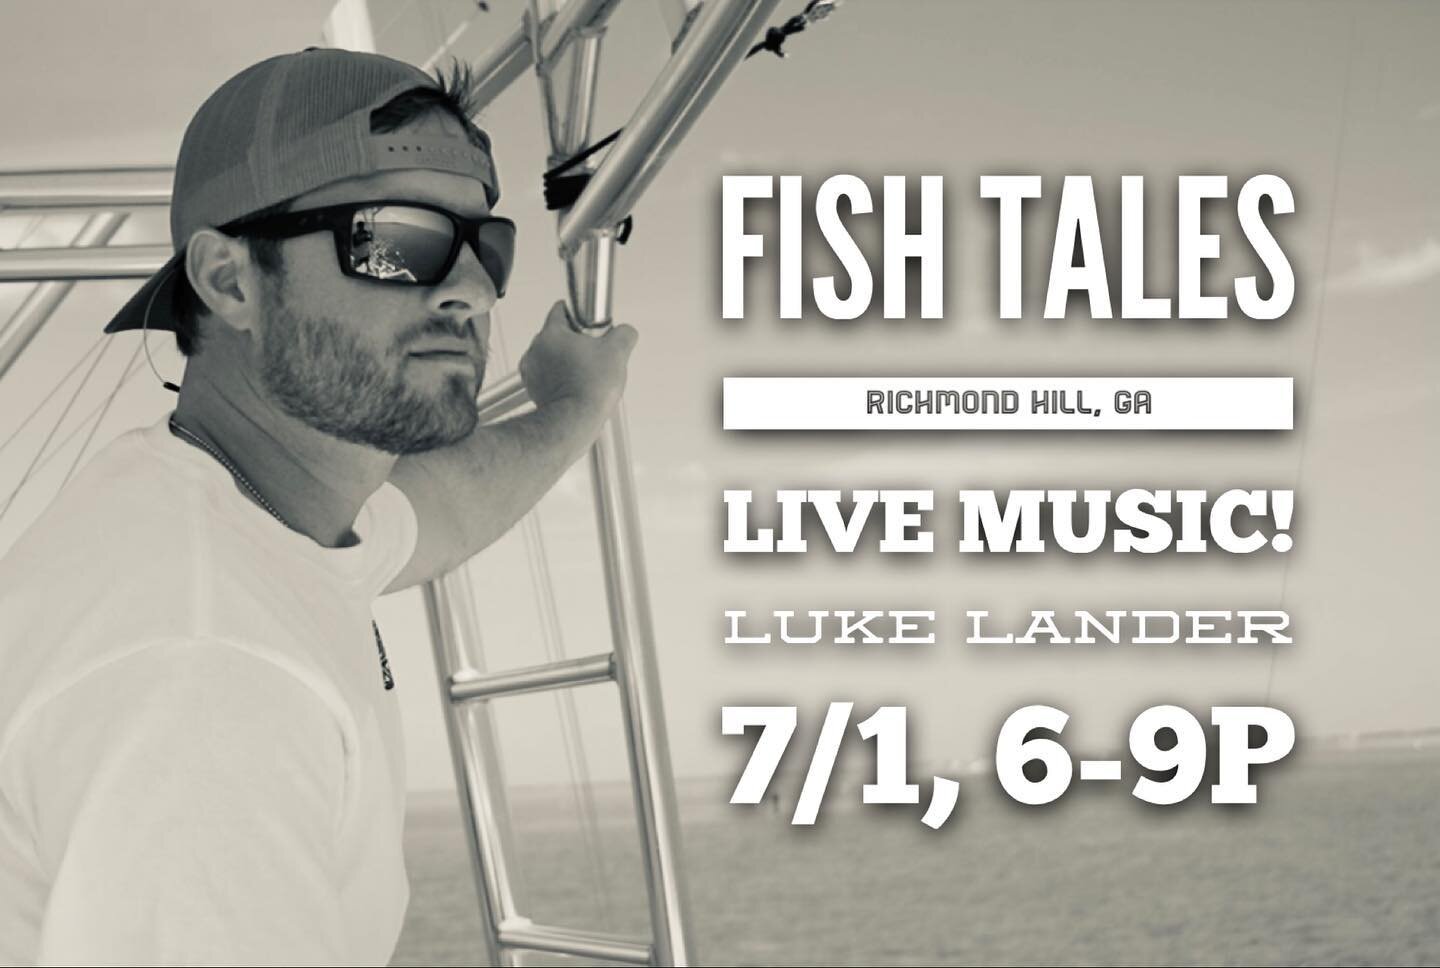 Sunset Thursday this week will be featuring Luke Lander! Come on out and enjoy some good food, good fun, and good music☺️ 

Live music will be from 6-9pm under the tiki 🏝 we can&rsquo;t wait to see you! 

#fishtalesrh #richmondhill #savannah #goodfo